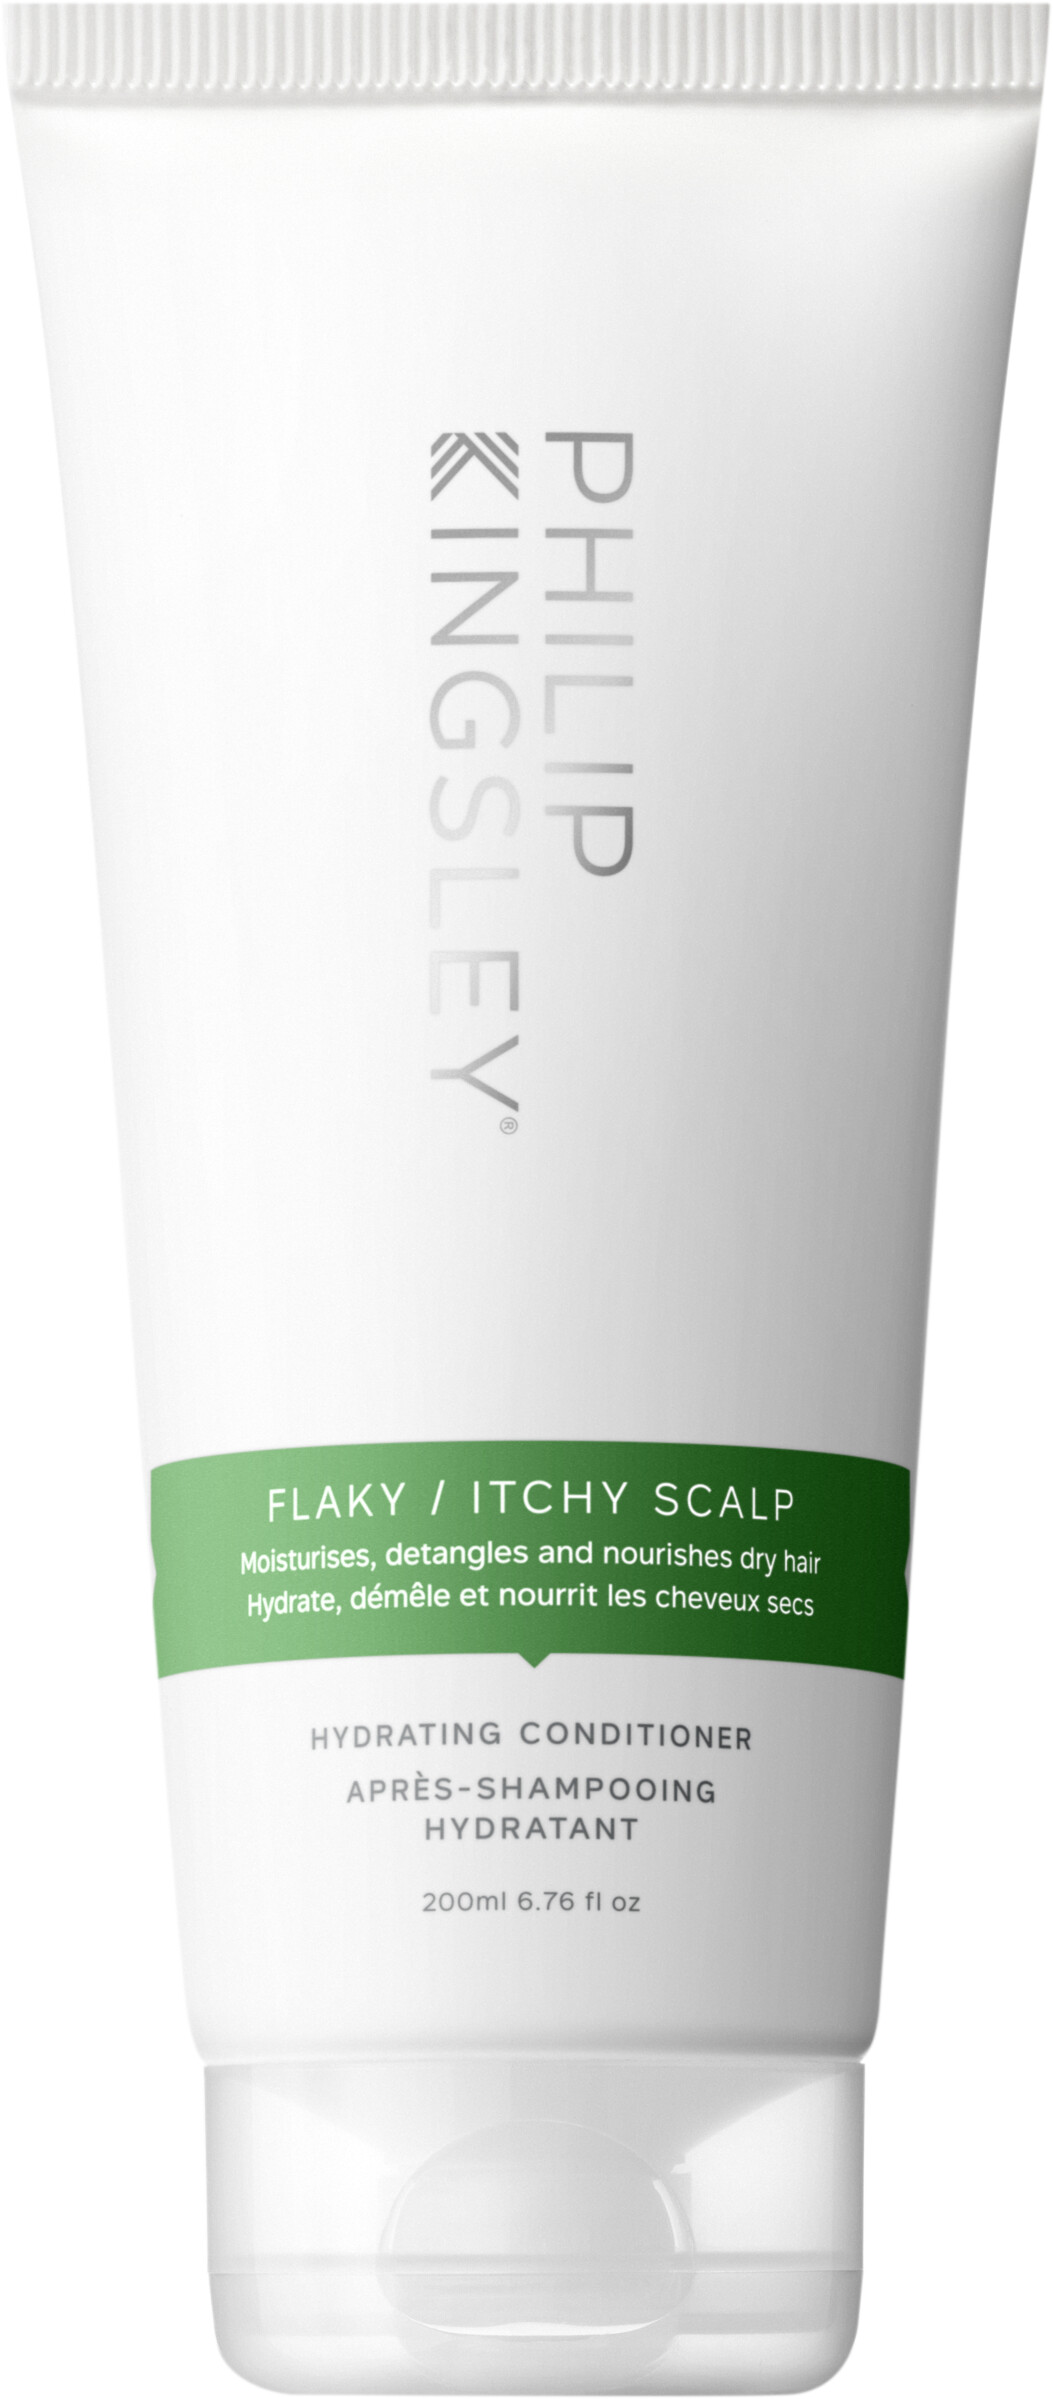 Philip Kingsley Flaky/Itchy Scalp Hydrating Conditioner 200ml